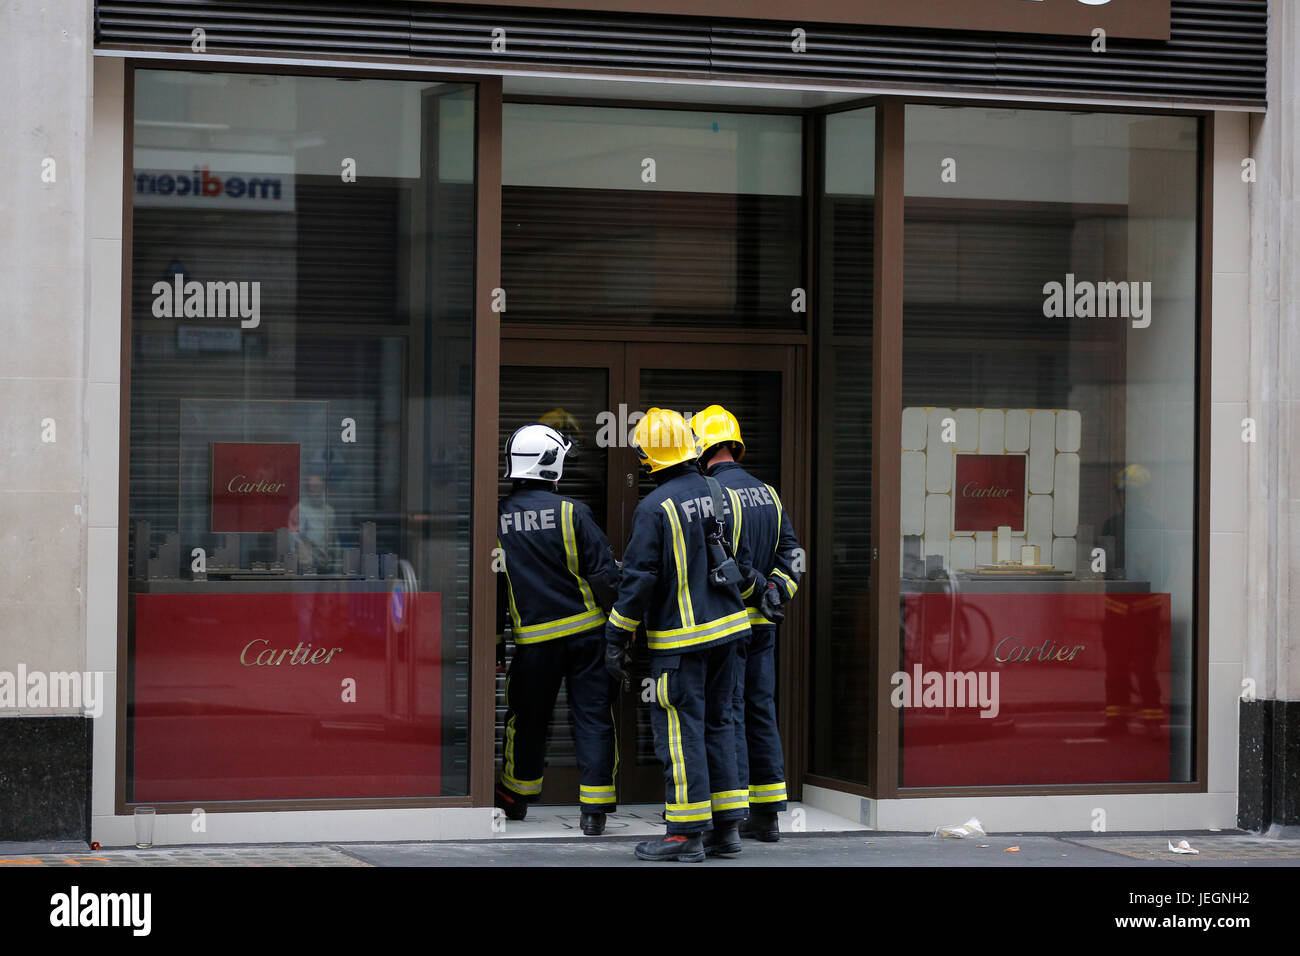 London, UK. 25th Jun, 2017. Firefighters and police responding to alarm sound outside Ernest Jones jewelry magazine on Cheapside near Bank station at City of London. Fire engines parked outside the shops and police suspending traffic on Cheapside. Nearby people watching police and firefighters gathering outside Ernest Jones shop. Loud alarm is heard around area. Fire engines were the first ones to respond as police arrived few minutes later. Everything looks safe from outside no visible fire to see or no smoke to see anywhere in the area. Credit: Antanas Martinkus for CTJA/Alamy Live News Stock Photo